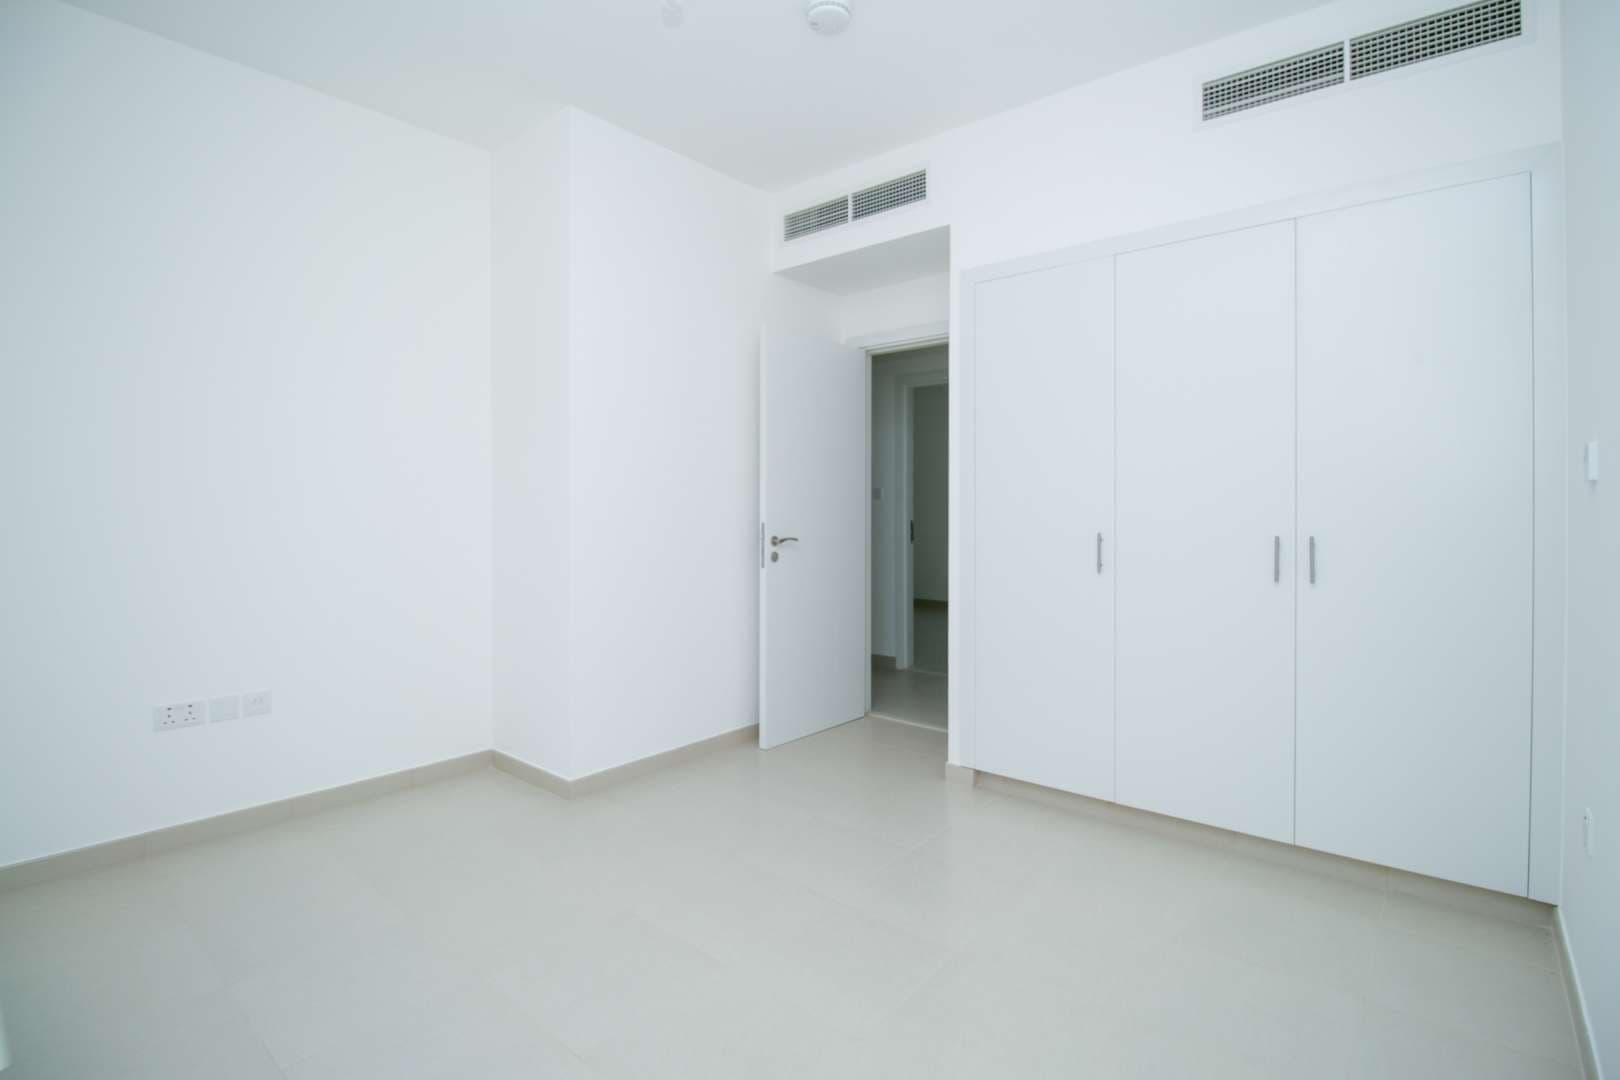 4 Bedroom Townhouse For Rent Zahra Townhouses Lp05569 450193db9cb5780.jpg